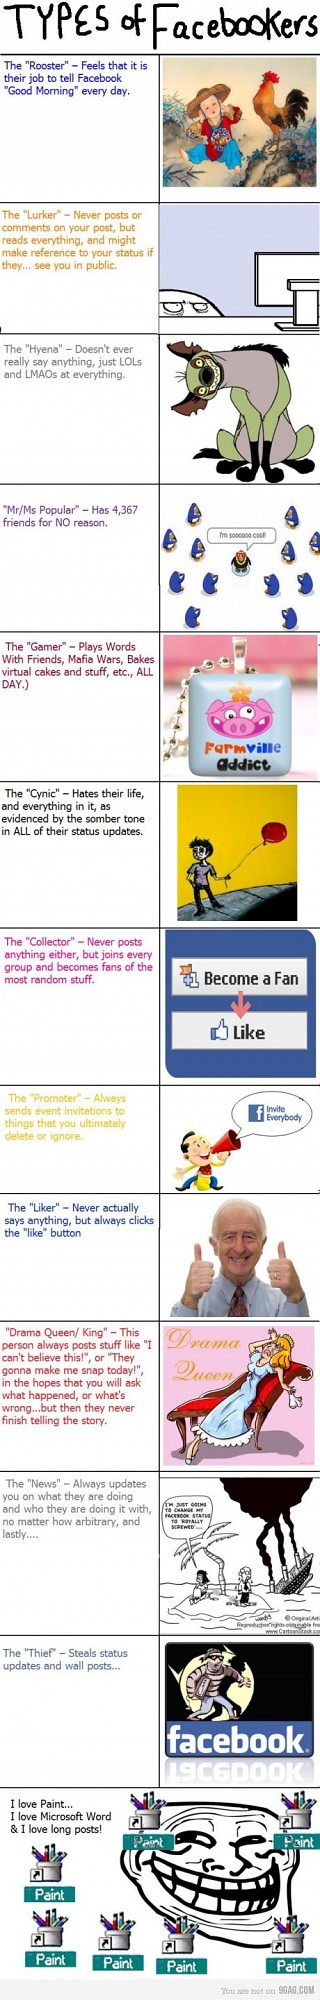 Types of Facebookers